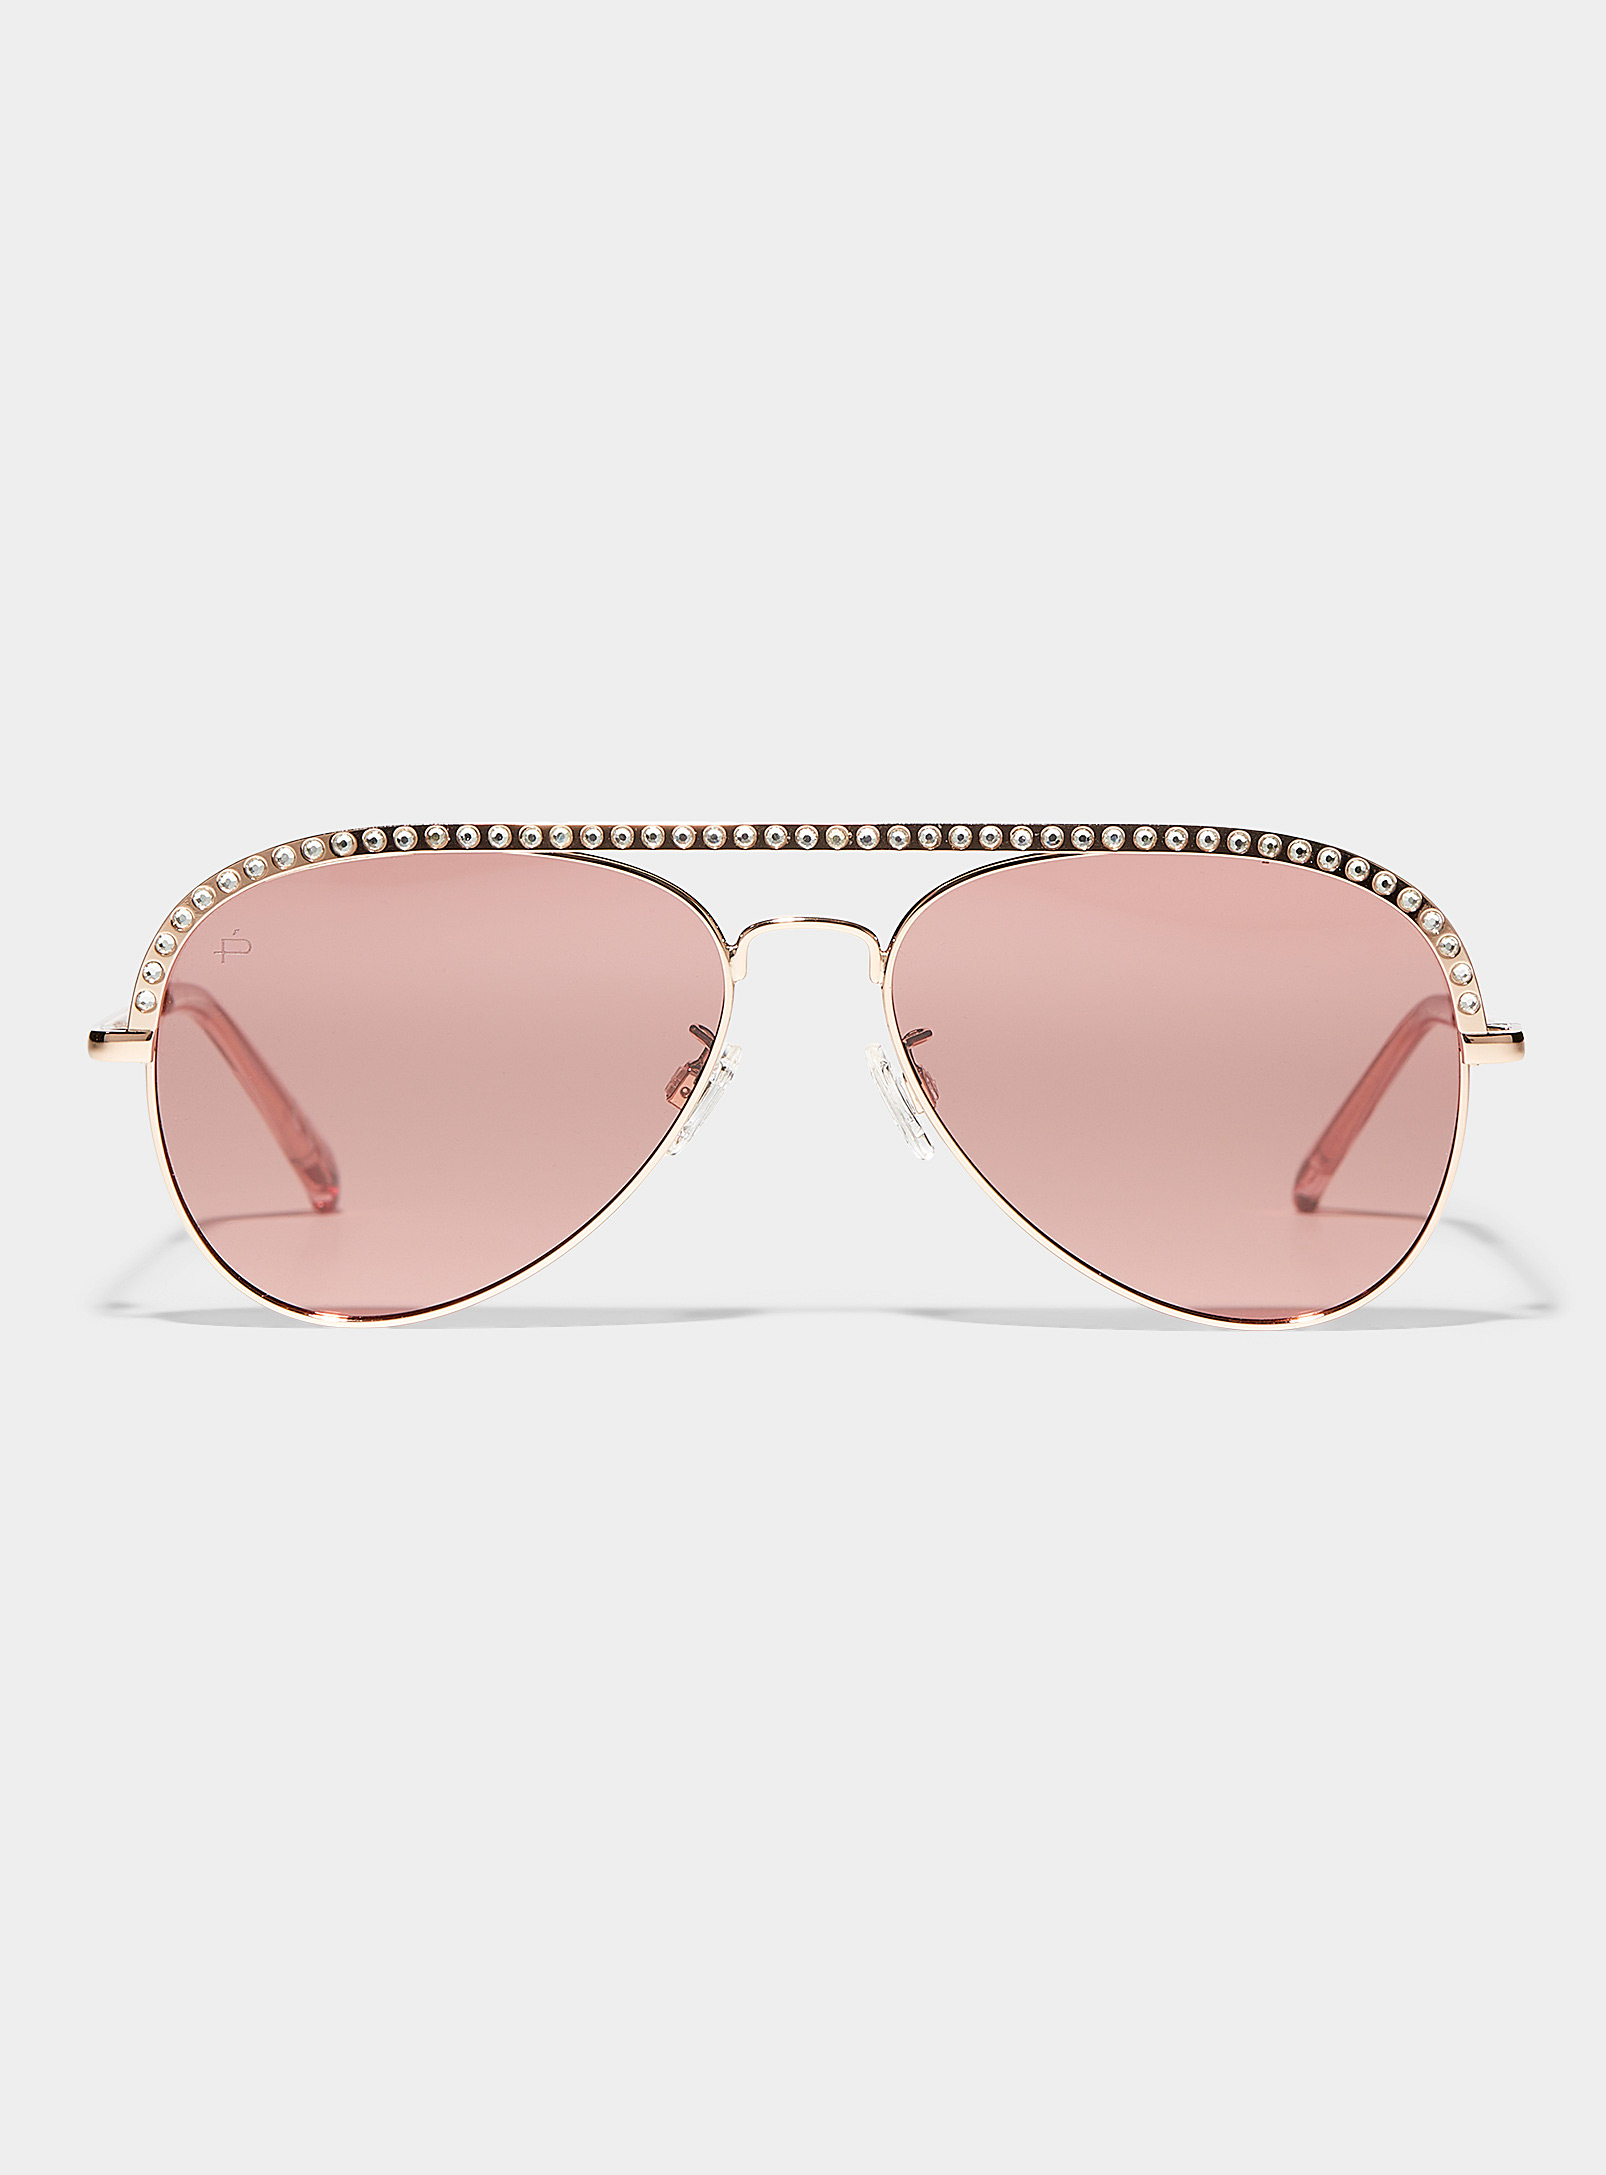 Privé Revaux Flossy Aviator Sunglasses In Pink